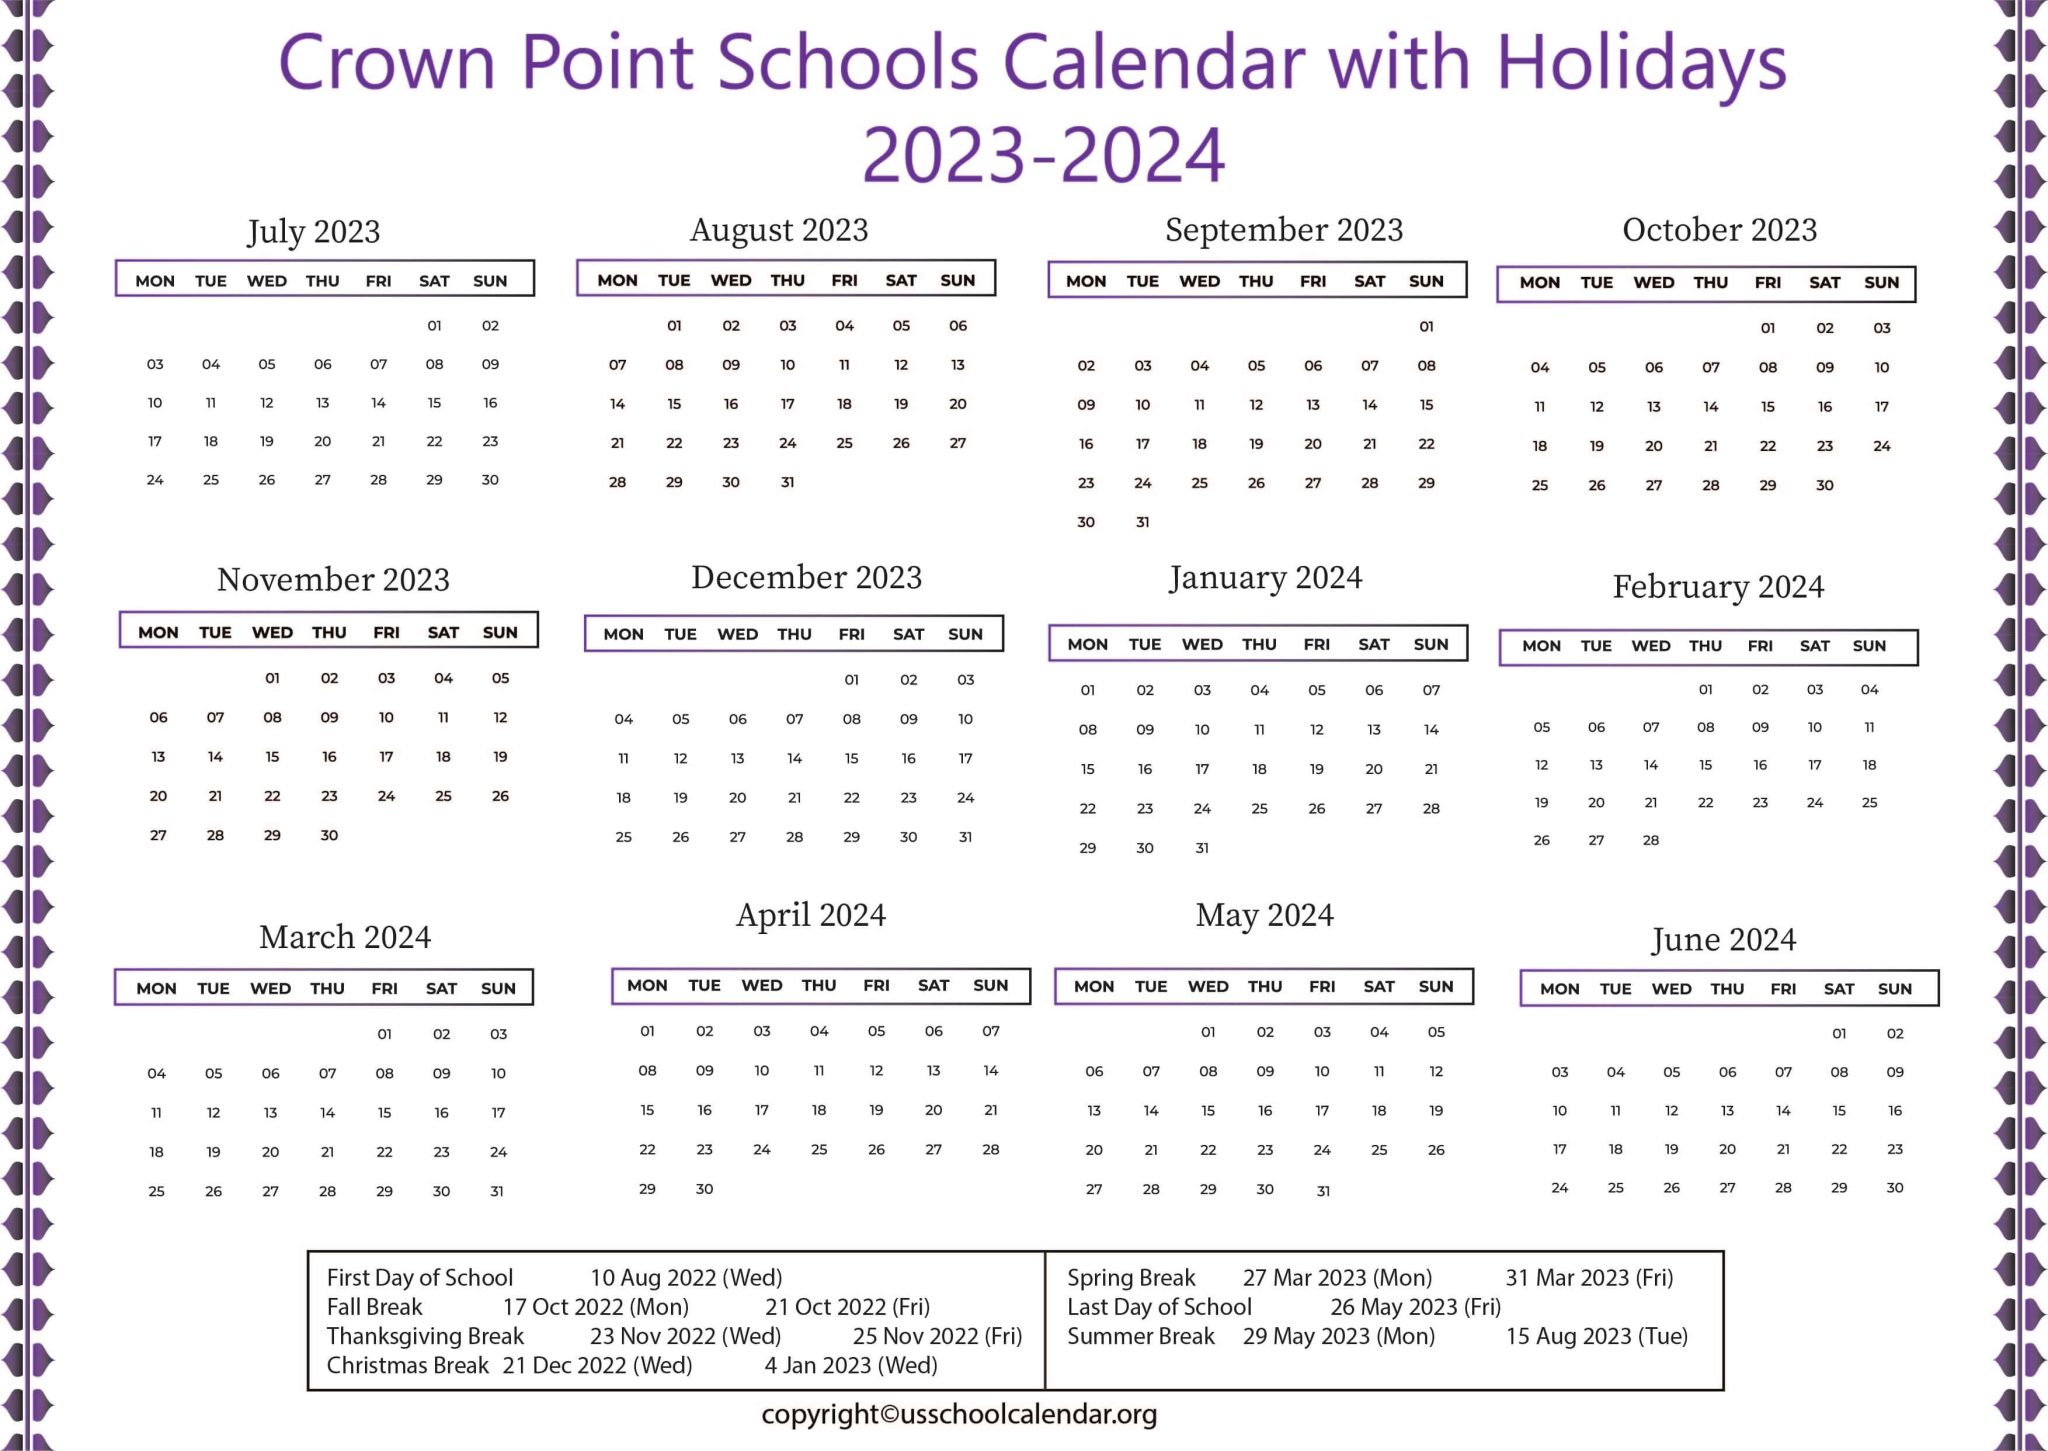 Crown Point Schools Calendar with Holidays 20232024 [CPS]